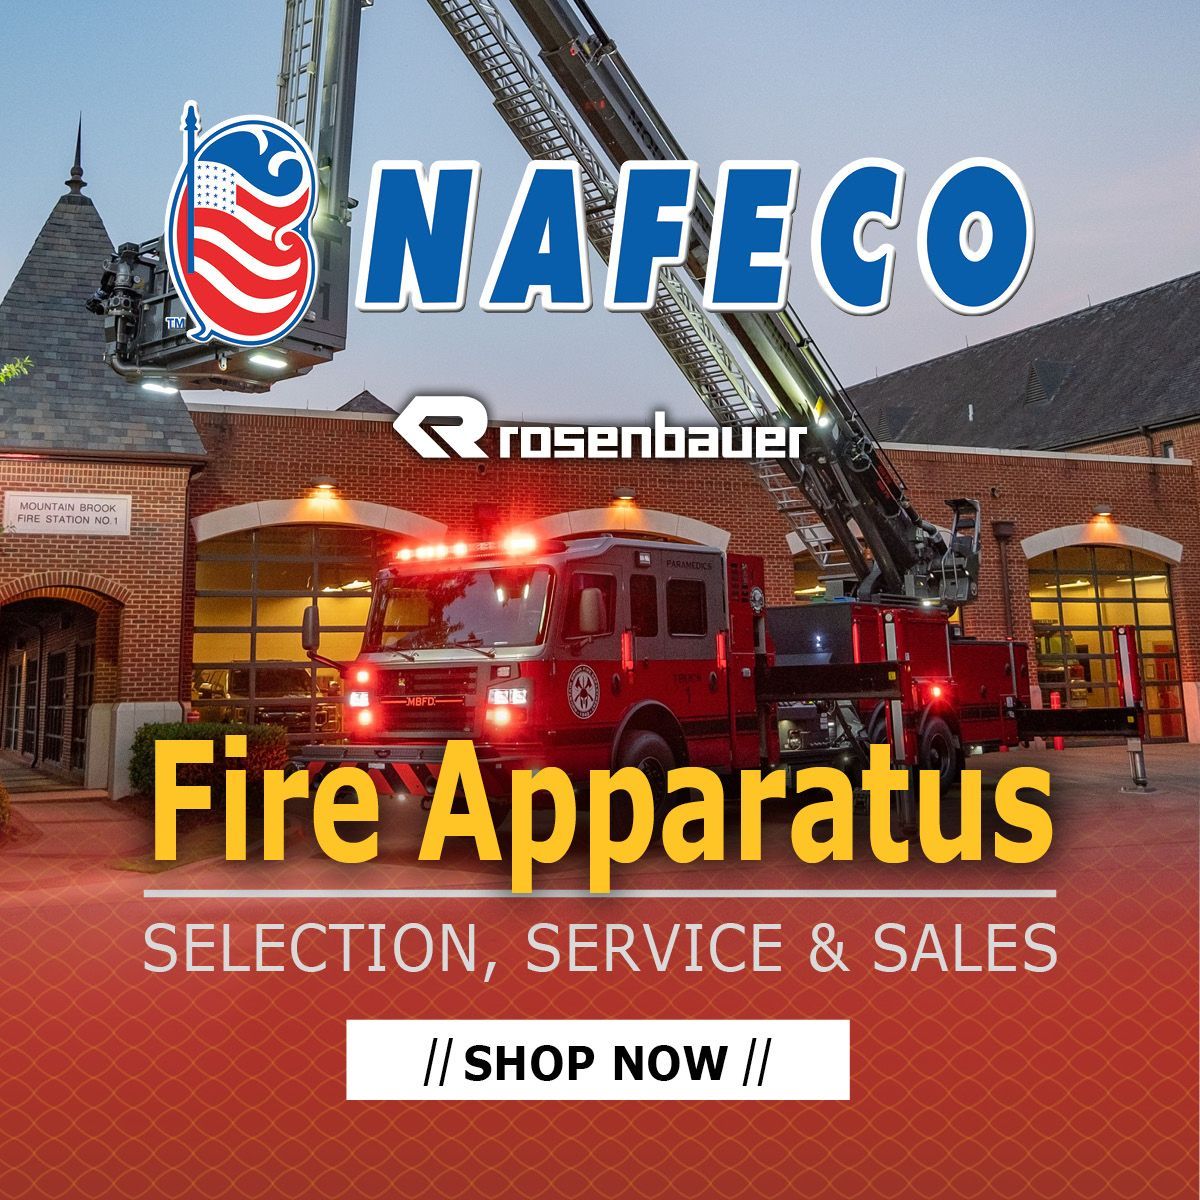 an advertisement for nafeco fire apparatus selection service and sales